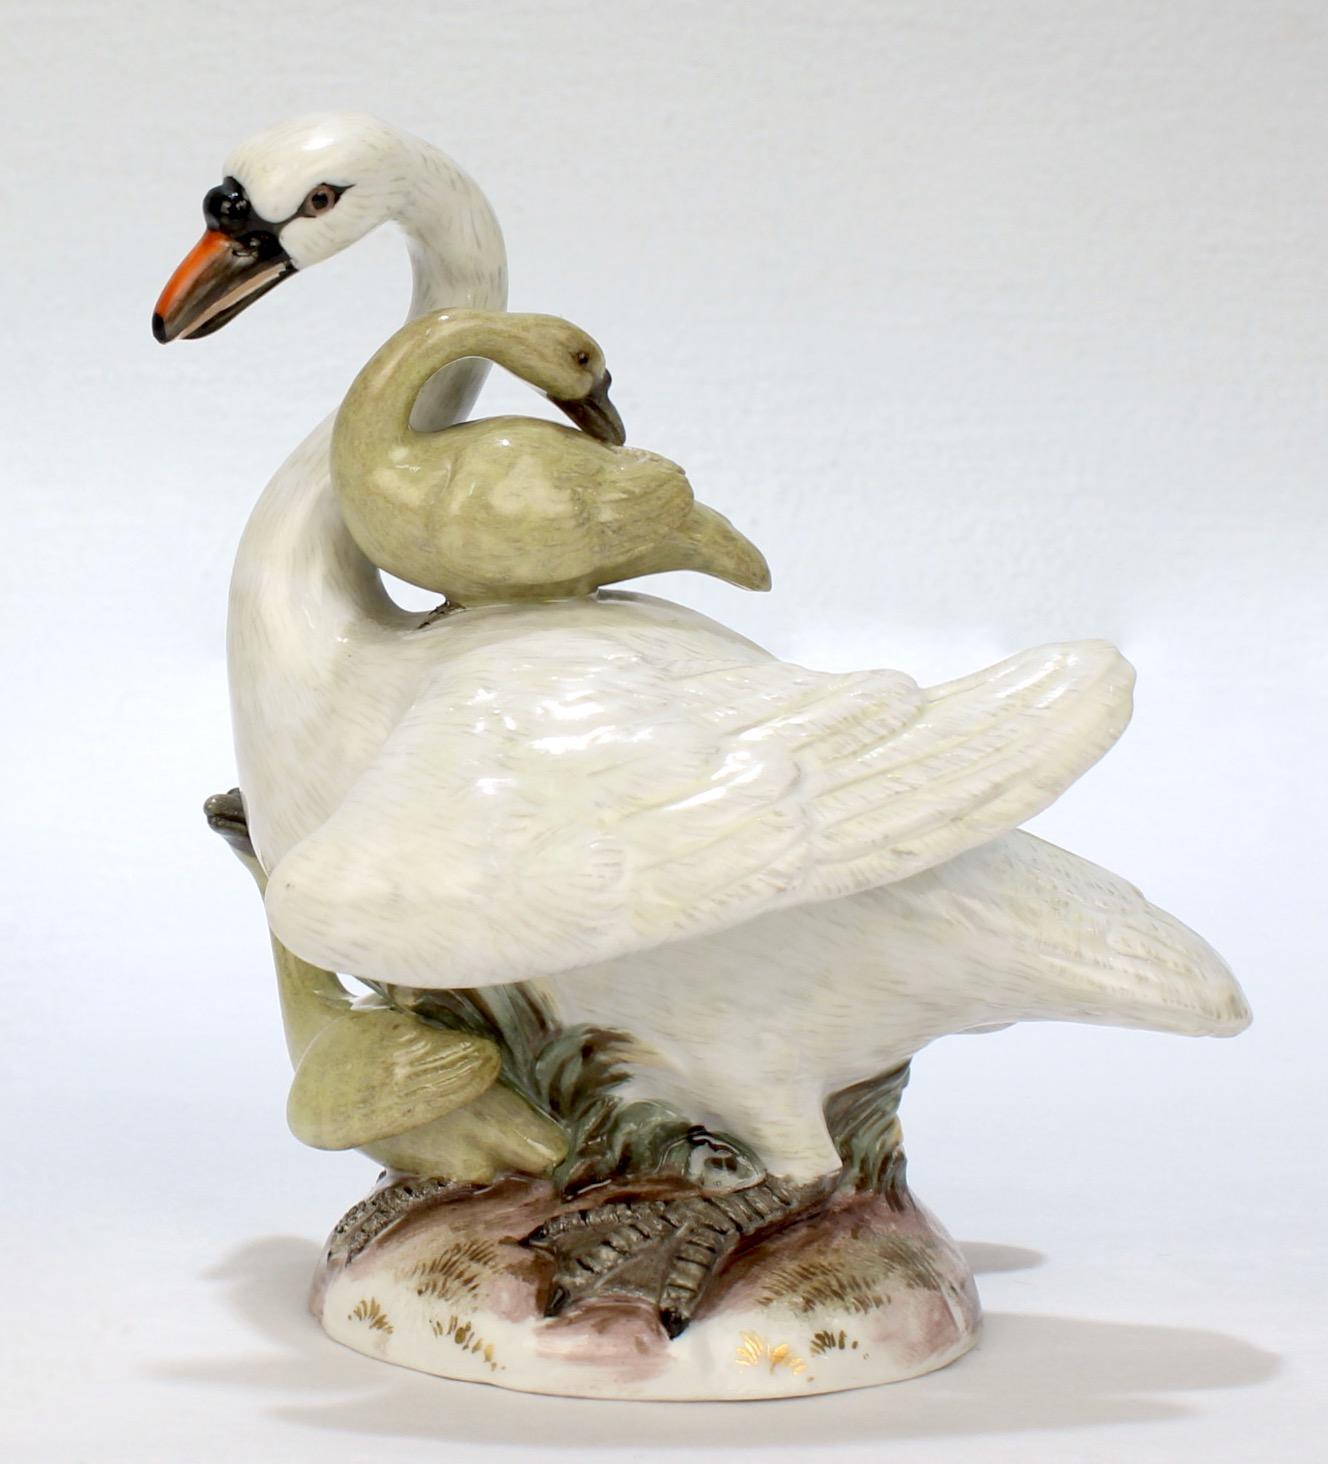 A very fine Meissen figurine.

Modeled as a swan with two cygnets on a naturalistic base.

The swan is white with light green highlights. The cygnets are green.

Simply a great figurine!

Date:
Late 19th or Early 20th Century

Overall